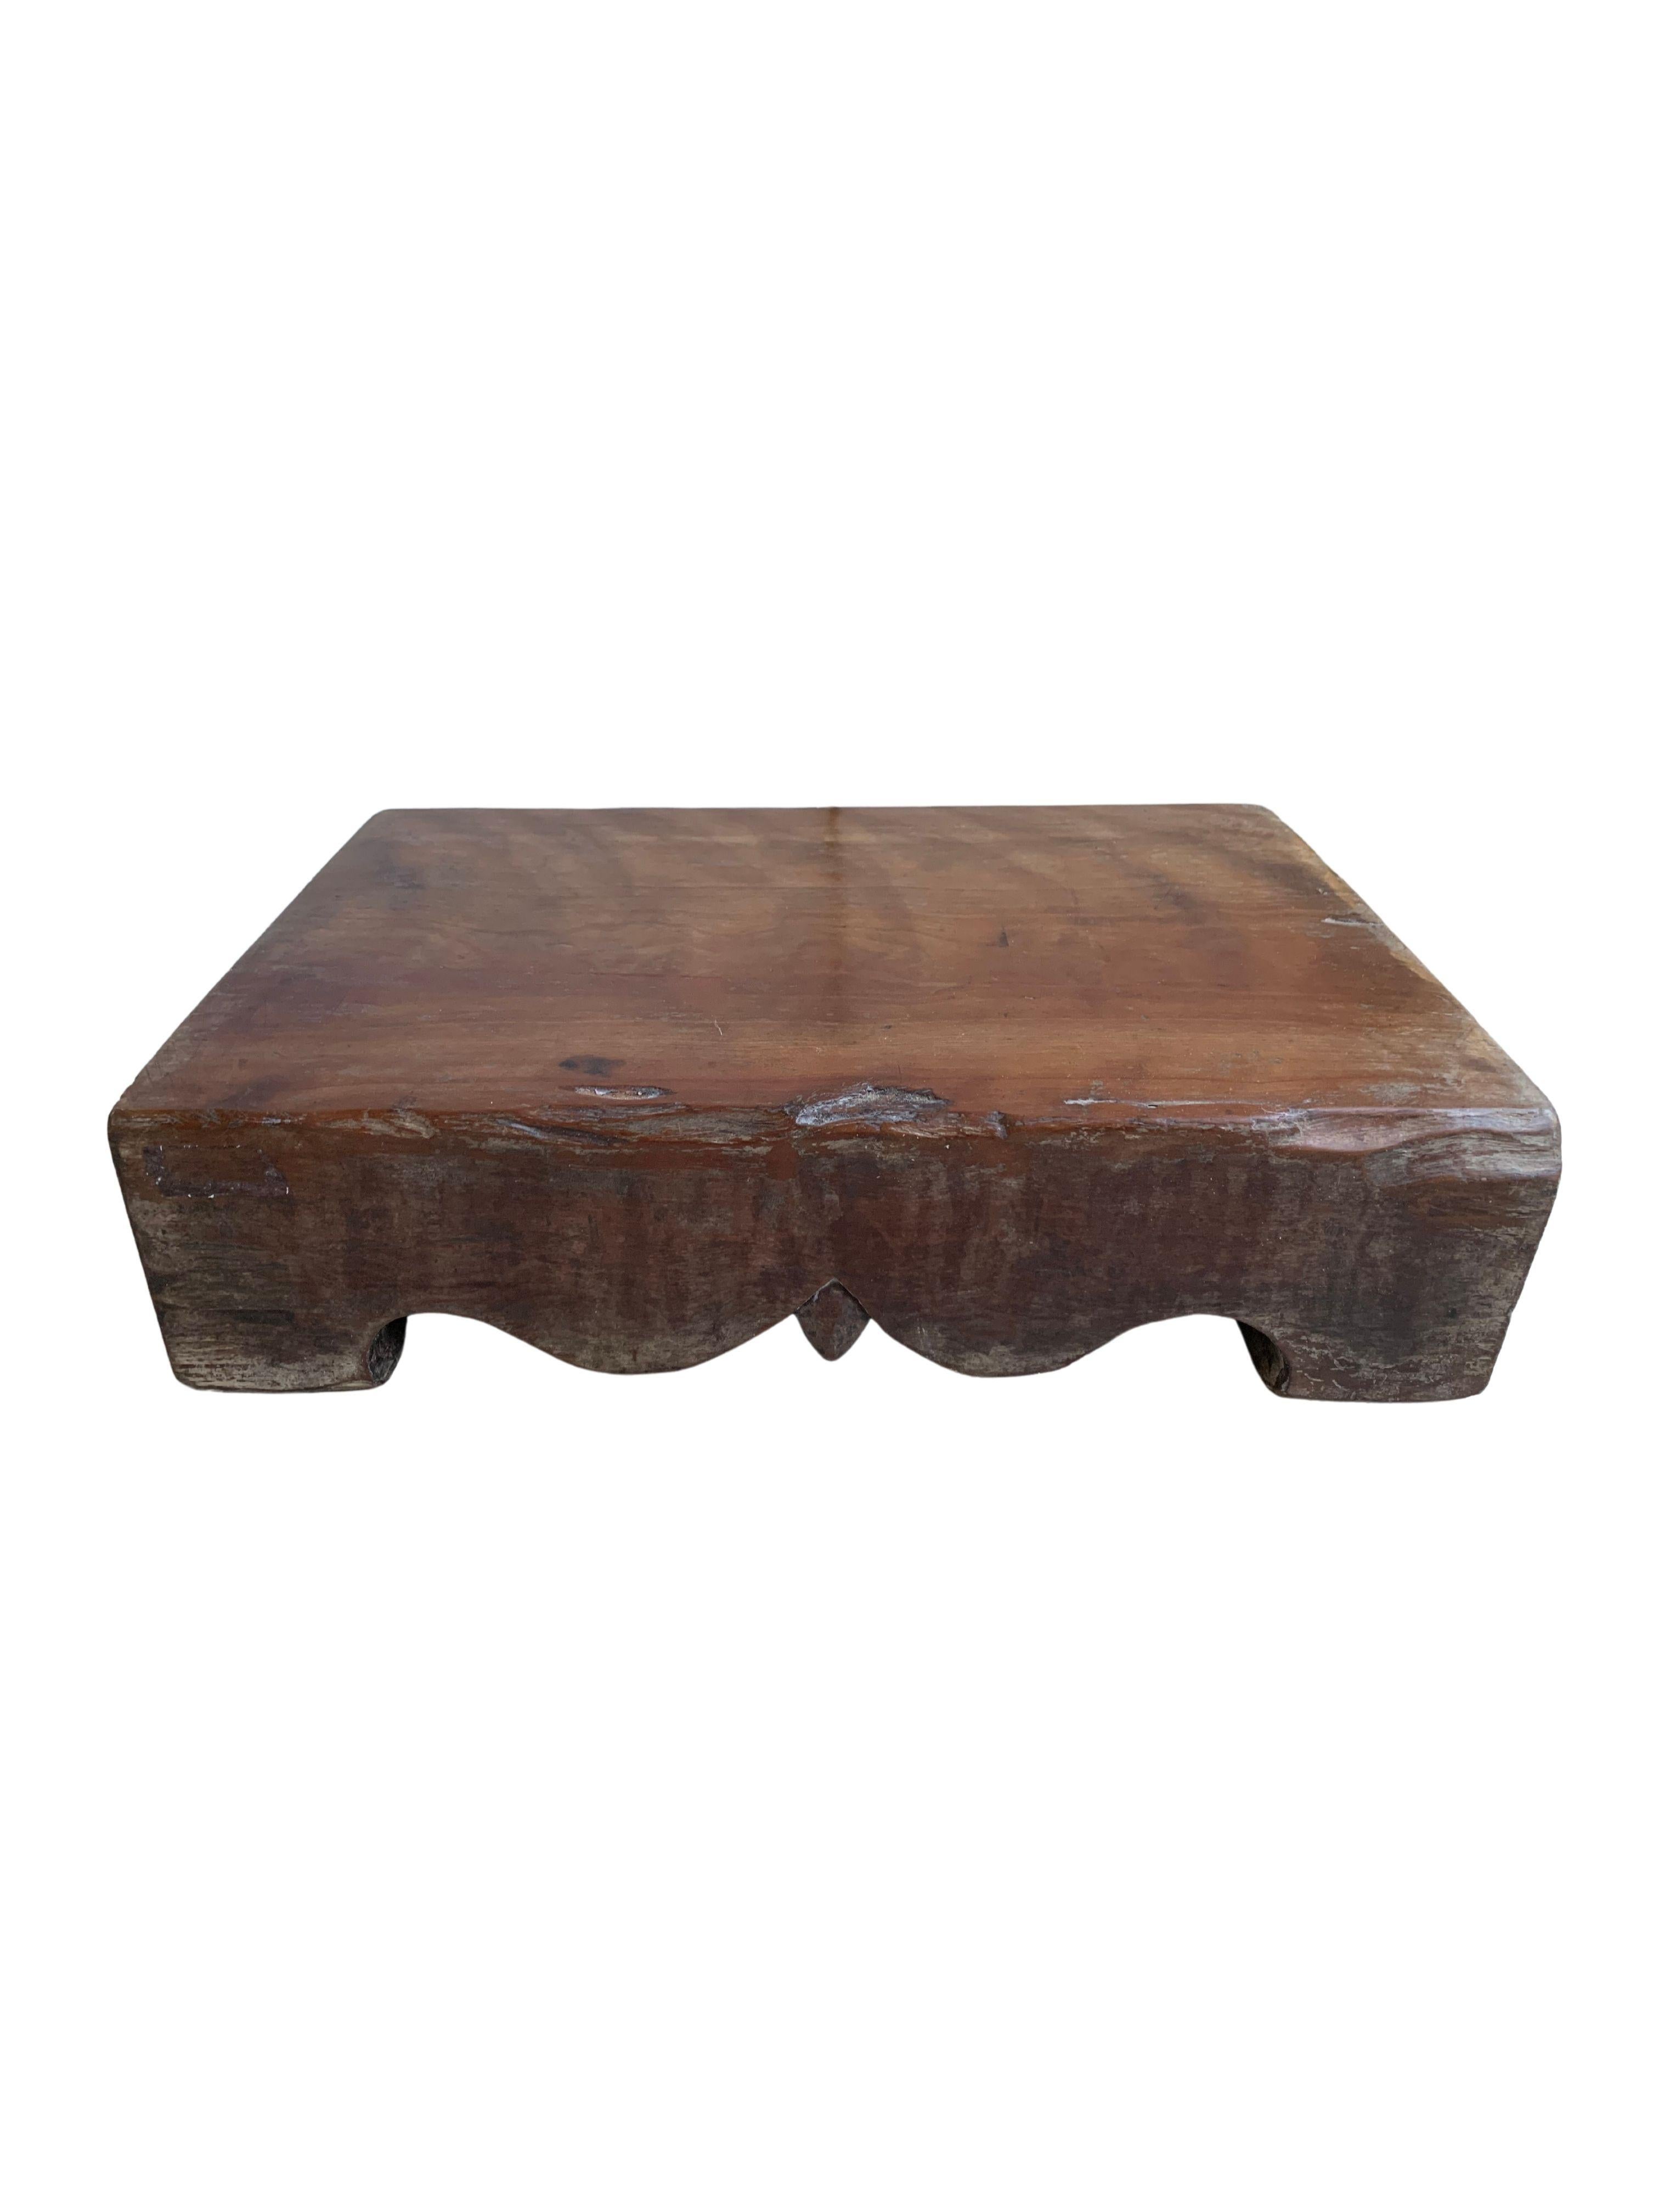 An Antique Chinese chopping block with hand-carved detailing. Made from a single block of hardwood, the block is relatively heavy and solid. A wonderful piece to use as a decorative centrepiece, or cheese / food board. 

 